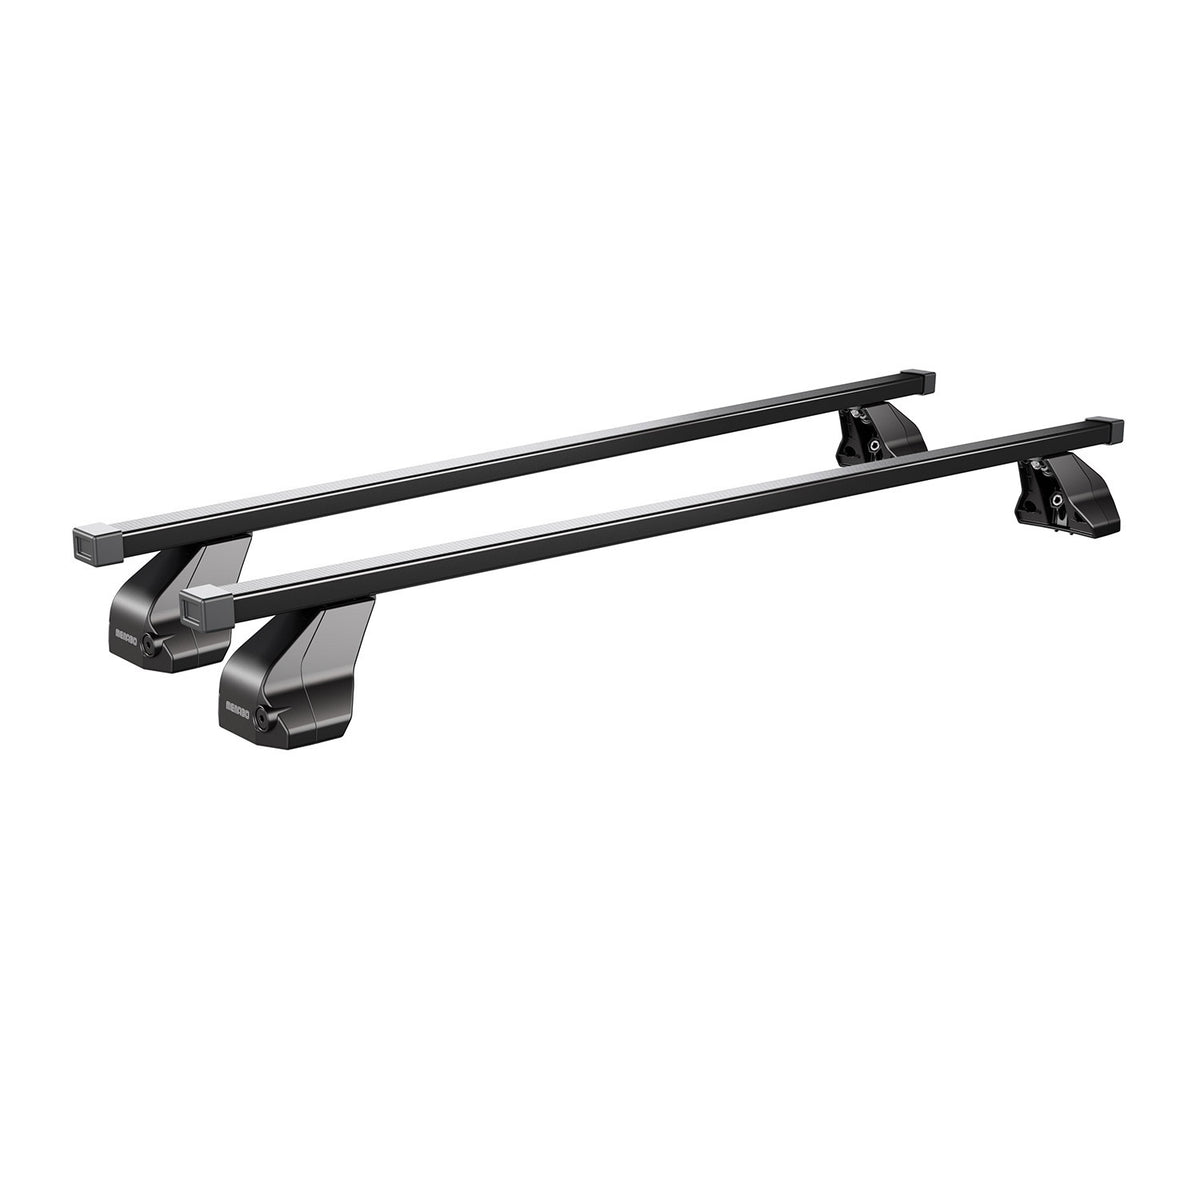 Menabo steel luggage rack roof rack for Mercedes A Class W176 2012-18 black